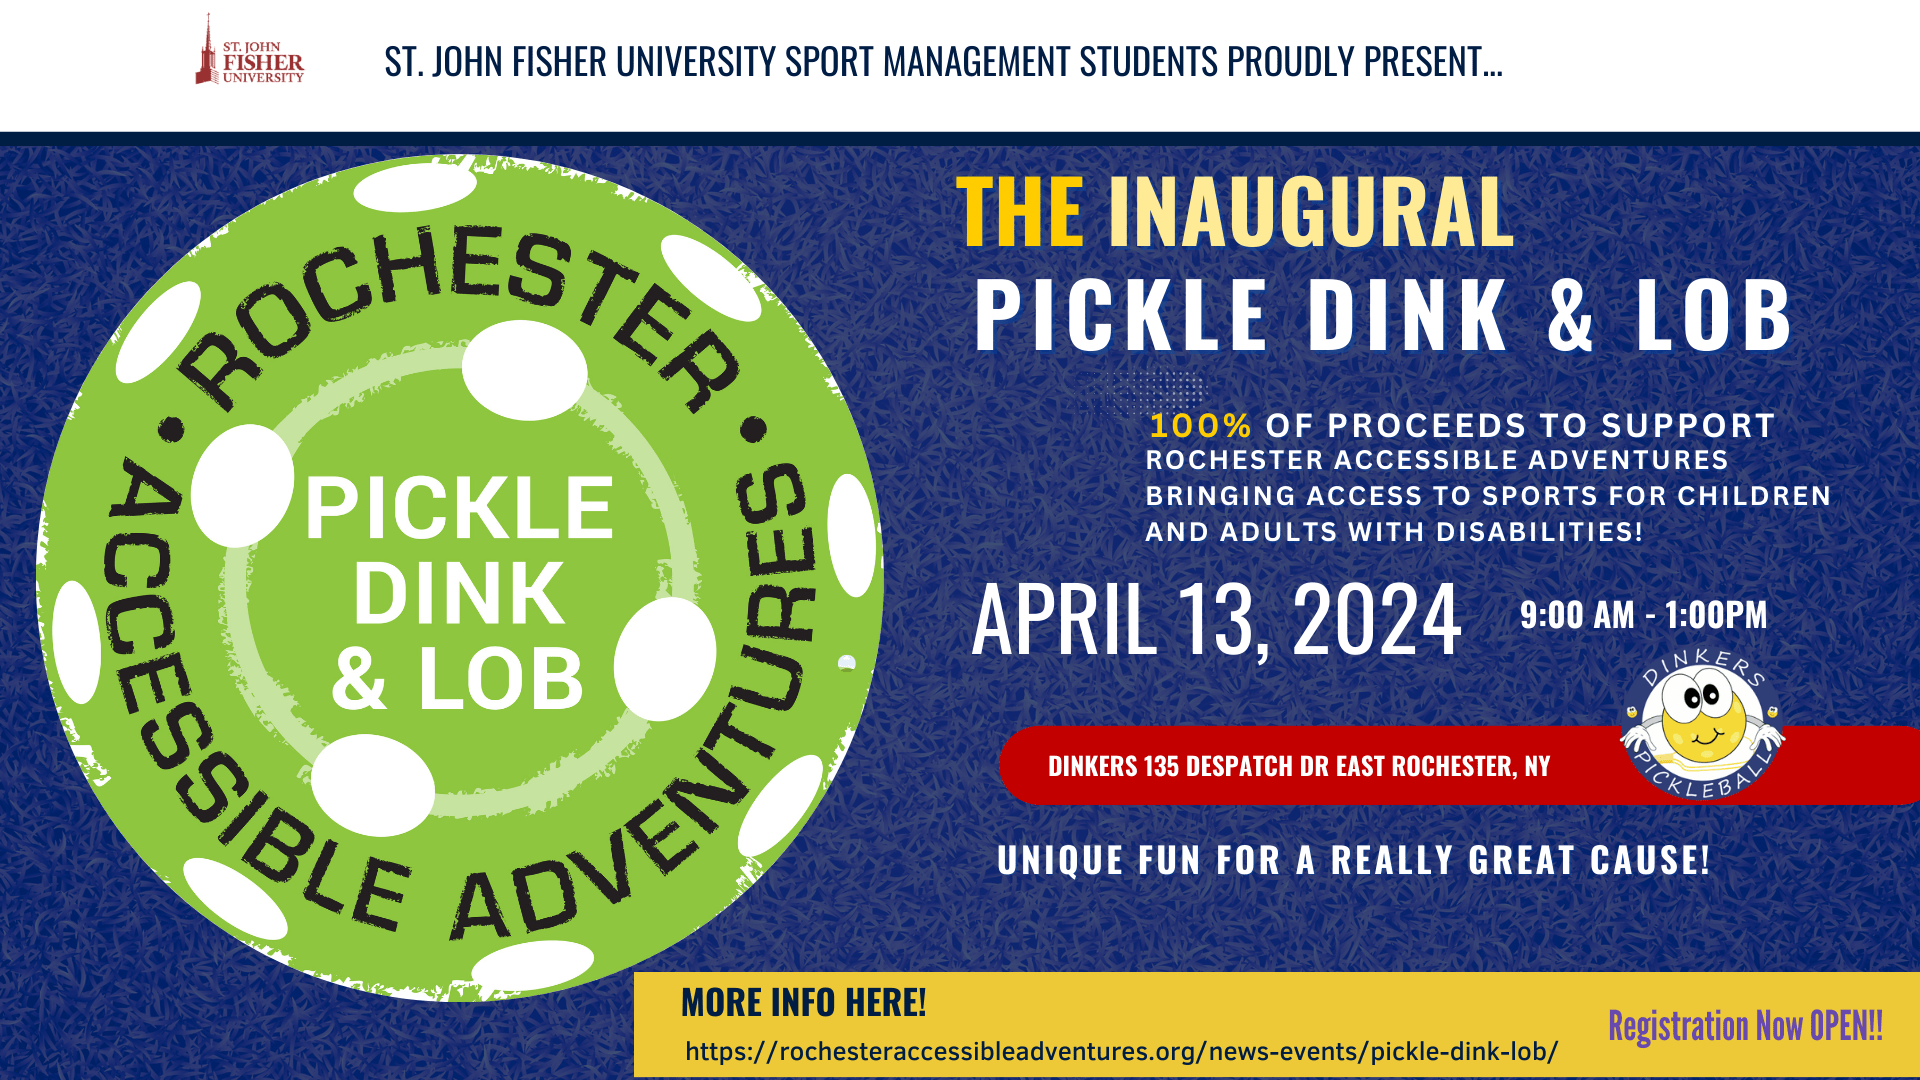 A banner graphic for The Inaugural Pickle Dink & Lob, with a neon green pickleball and event info.